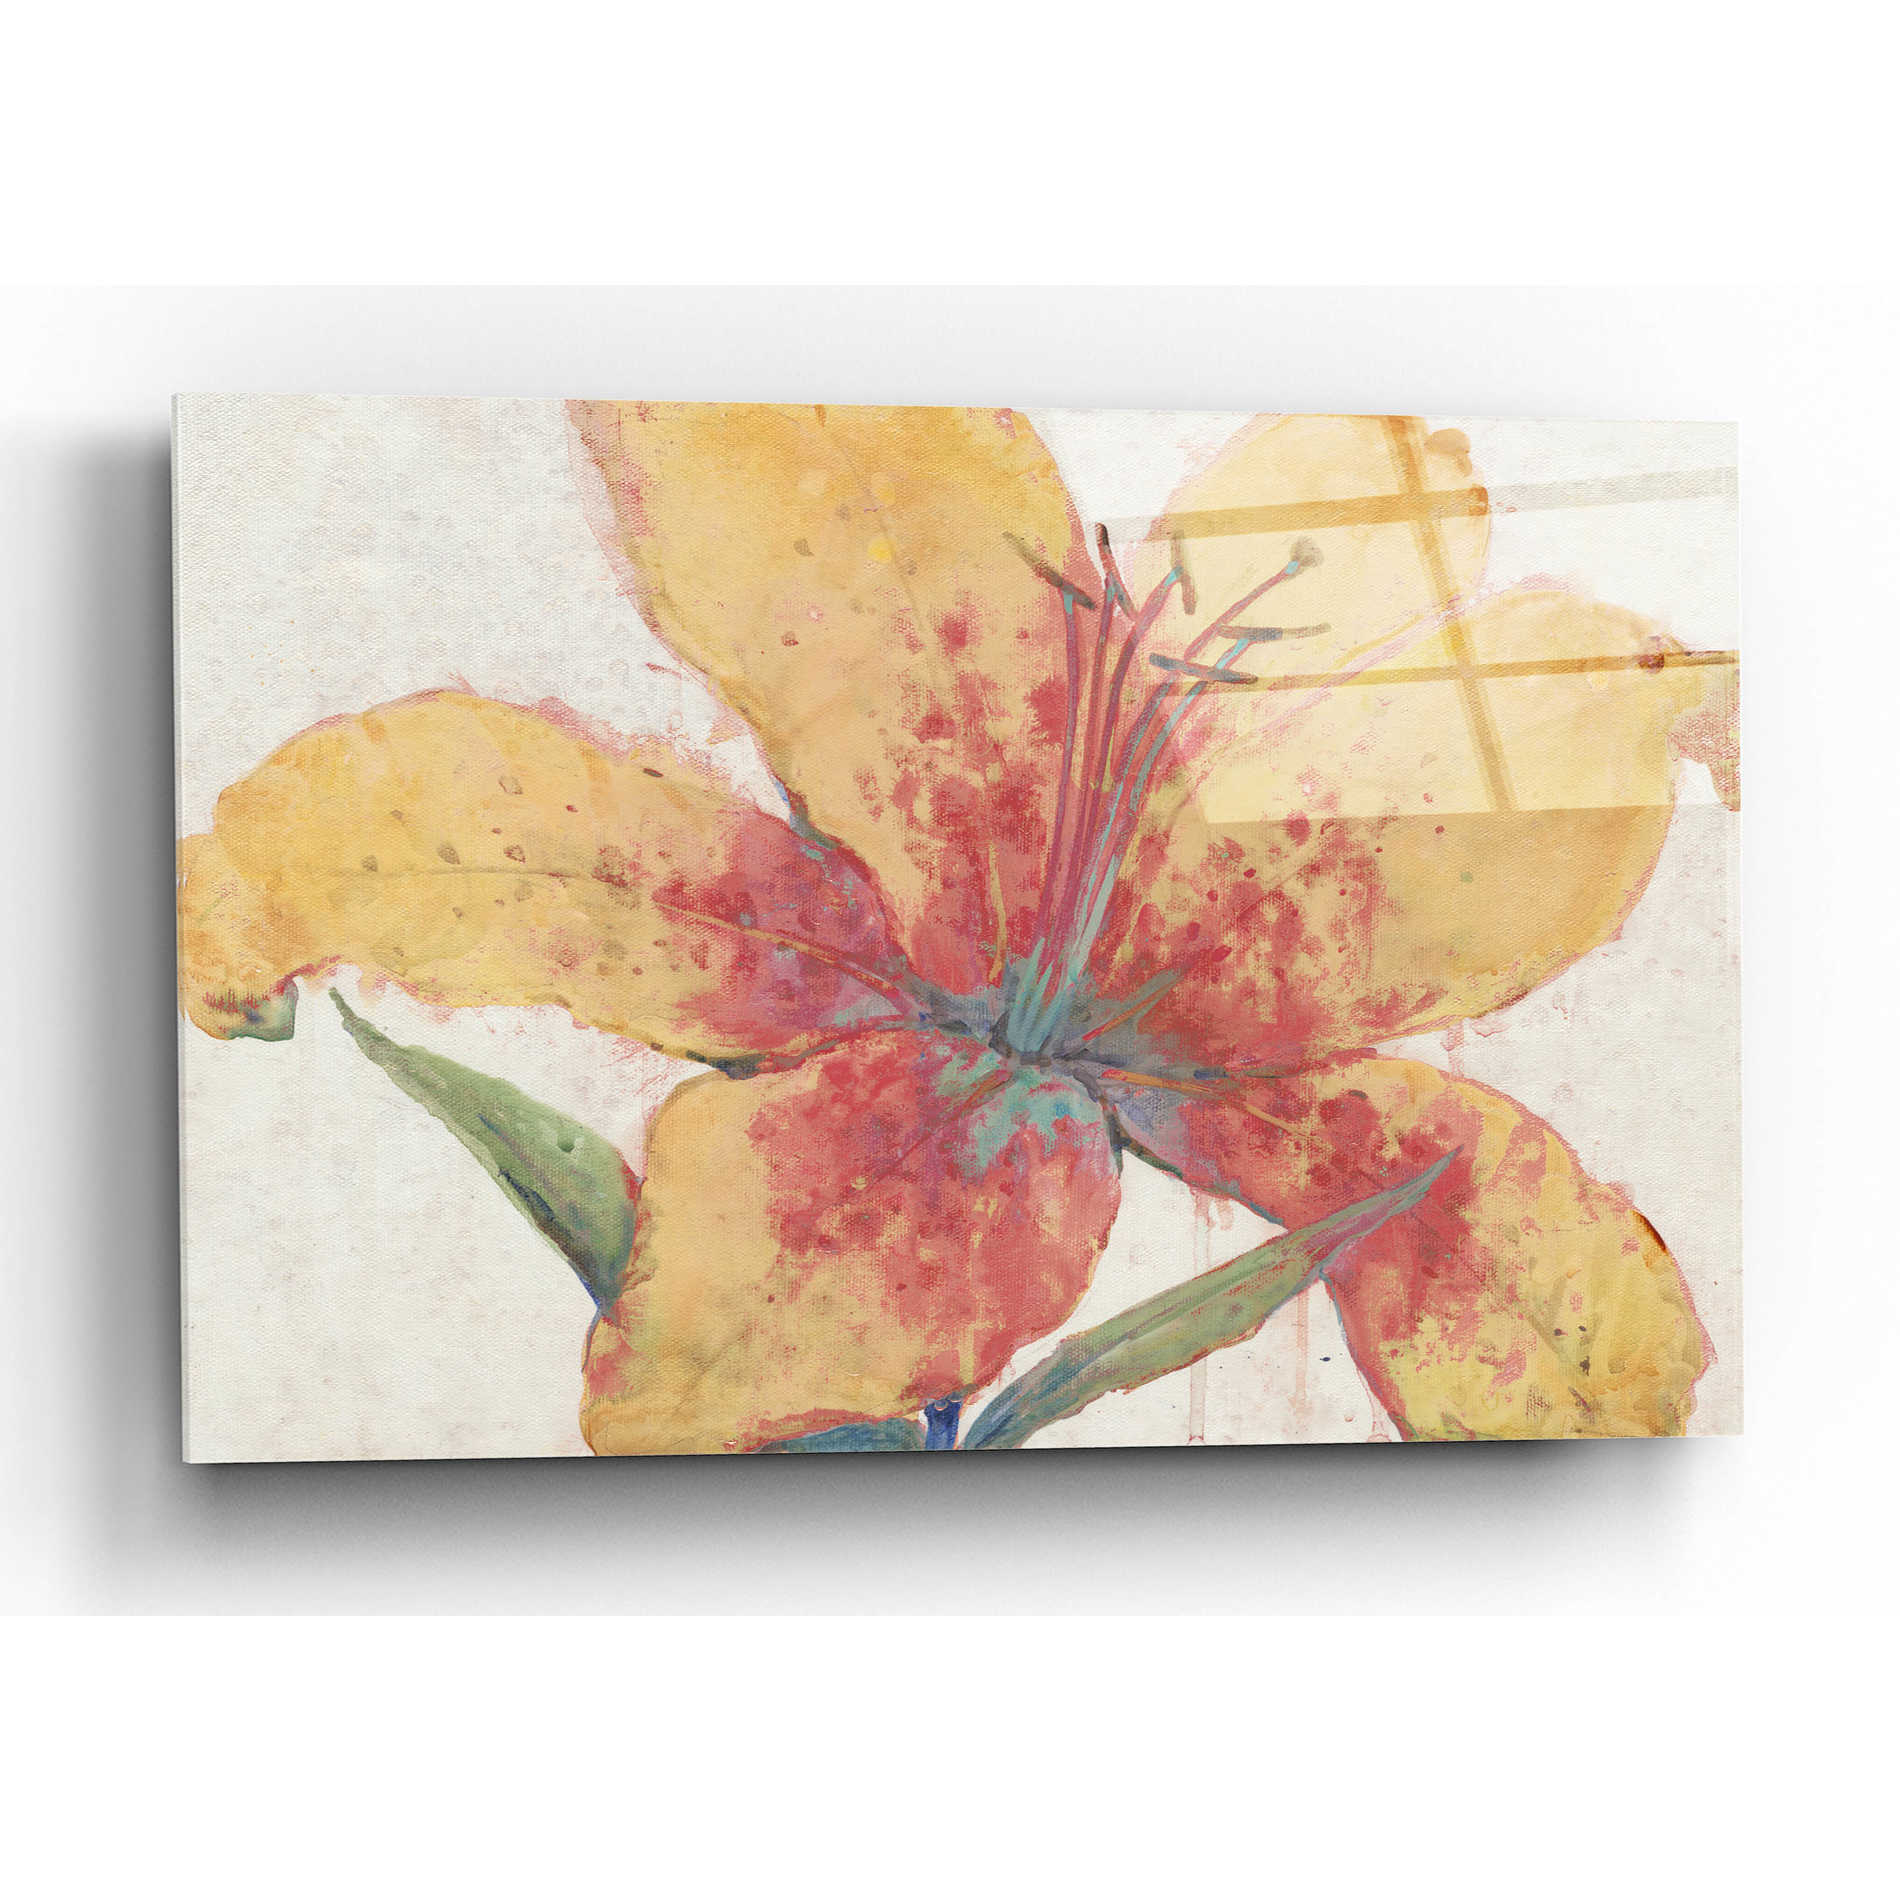 Epic Art 'Blooming Lily' by Tim O'Toole, Acrylic Glass Wall Art